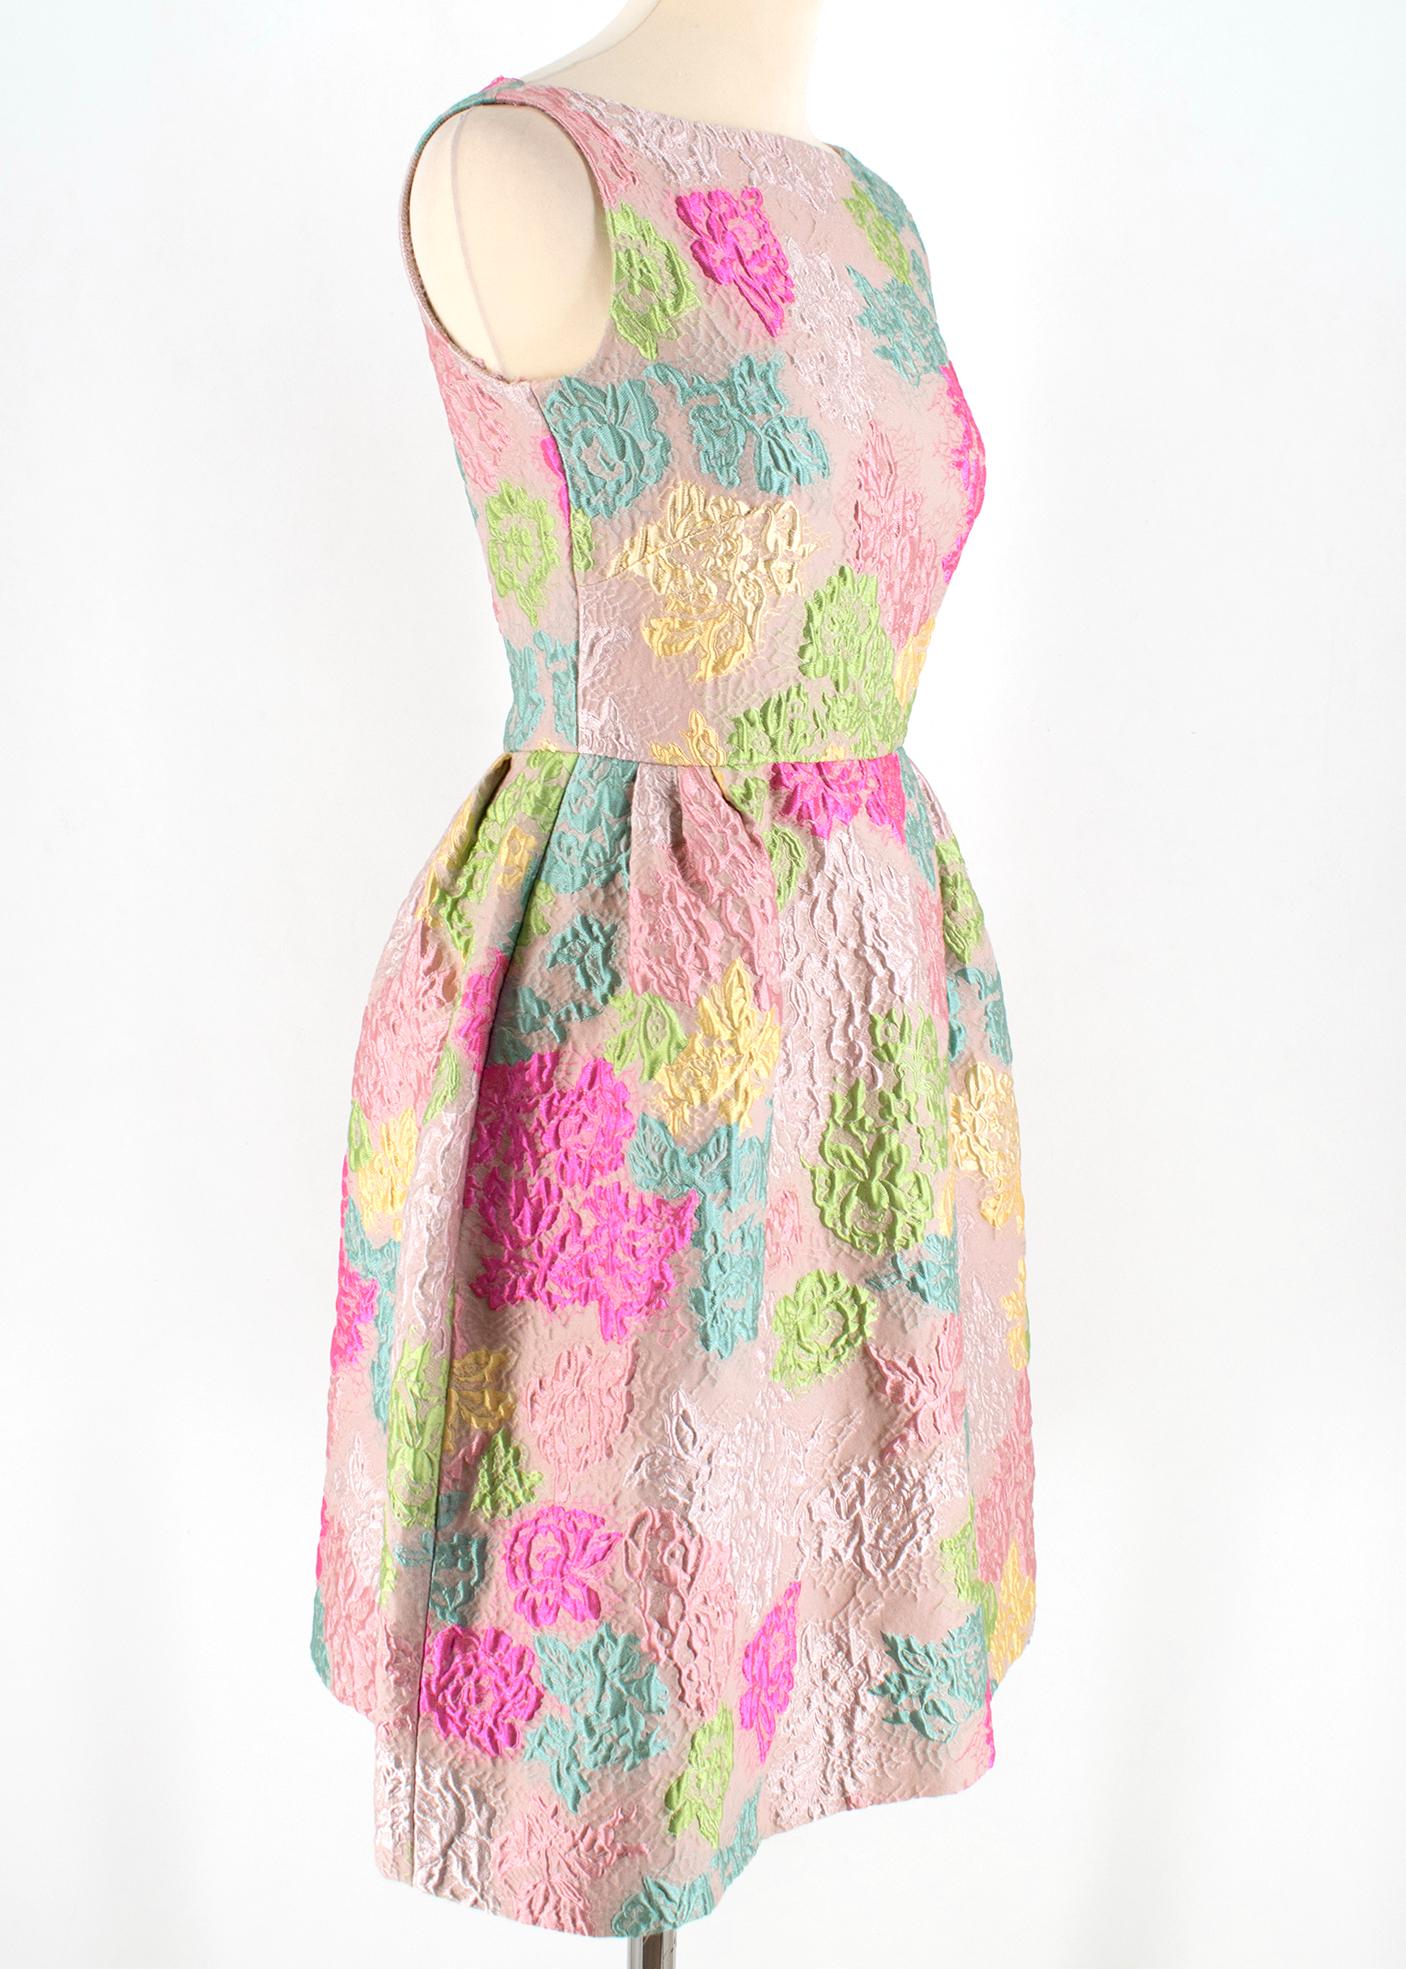 Valentino Blush Multi-Colour Floral Brocade Silk Dress

- silk cloque dress
- pastel colours 
- silk lined
- boat neckline
- sleeveless
- zip closure to the back

Please note, these items are pre-owned and may show some signs of storage, even when